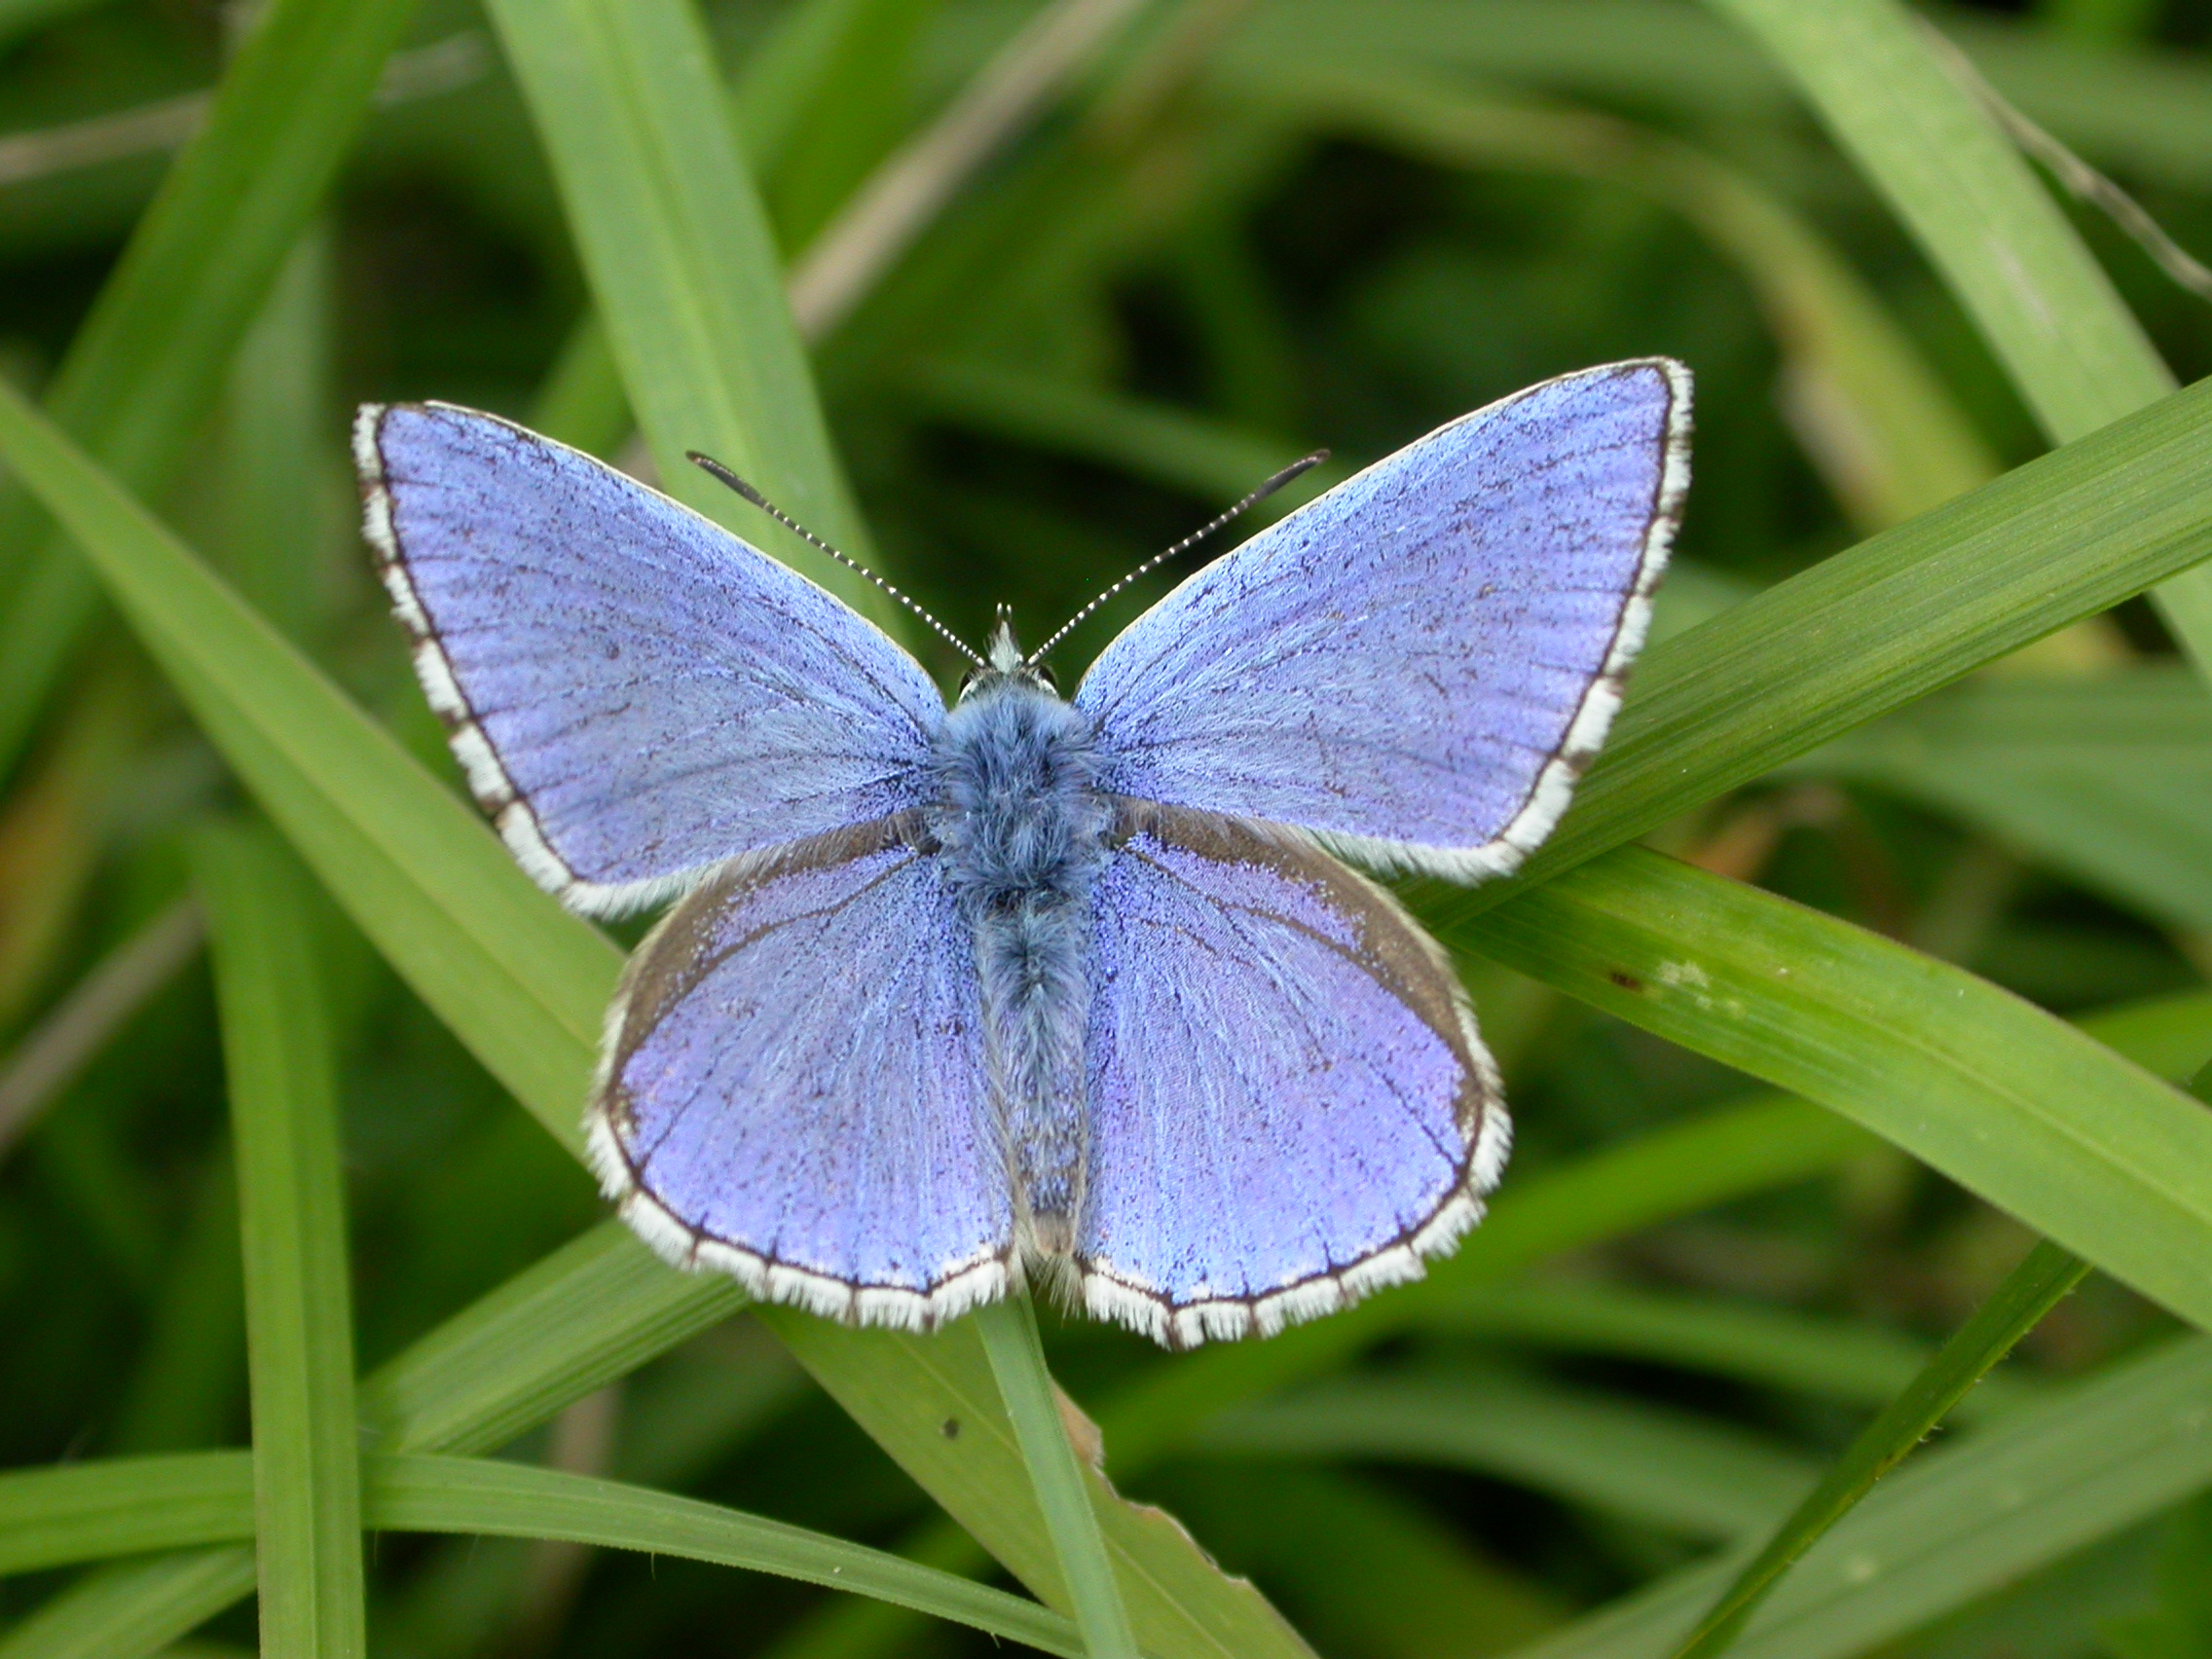 Close up of a Common Blue Adonis butterfly on a blade of grass.